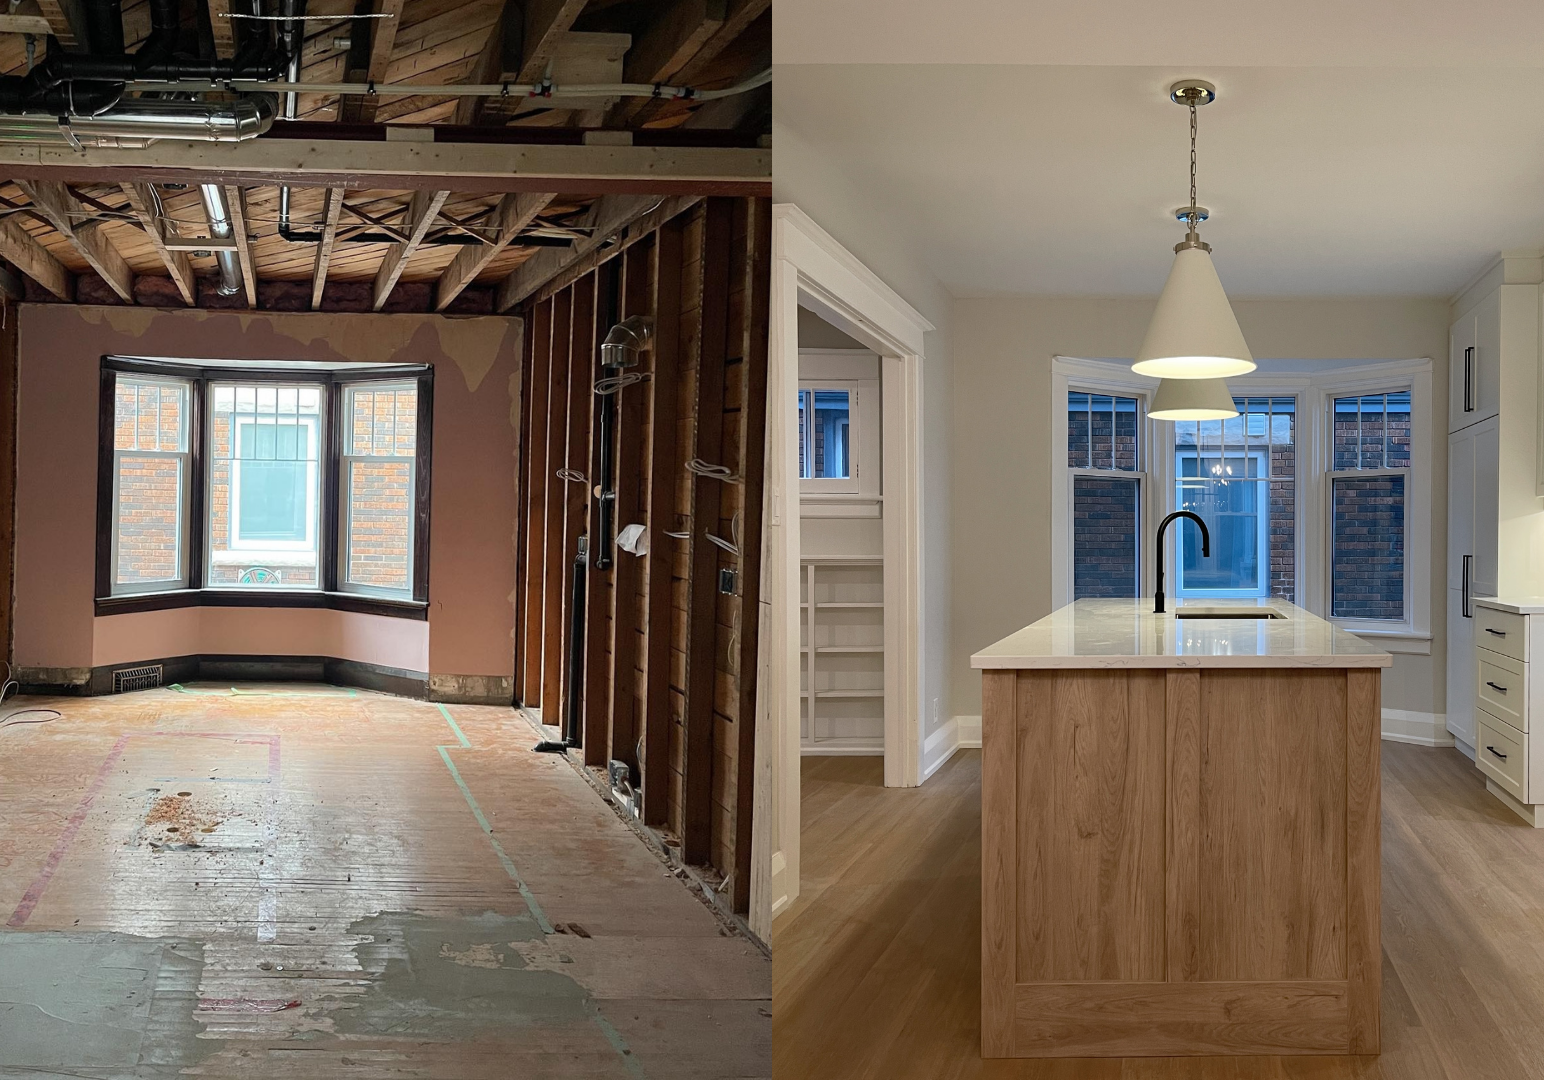 Before and After Kitchen Renovation